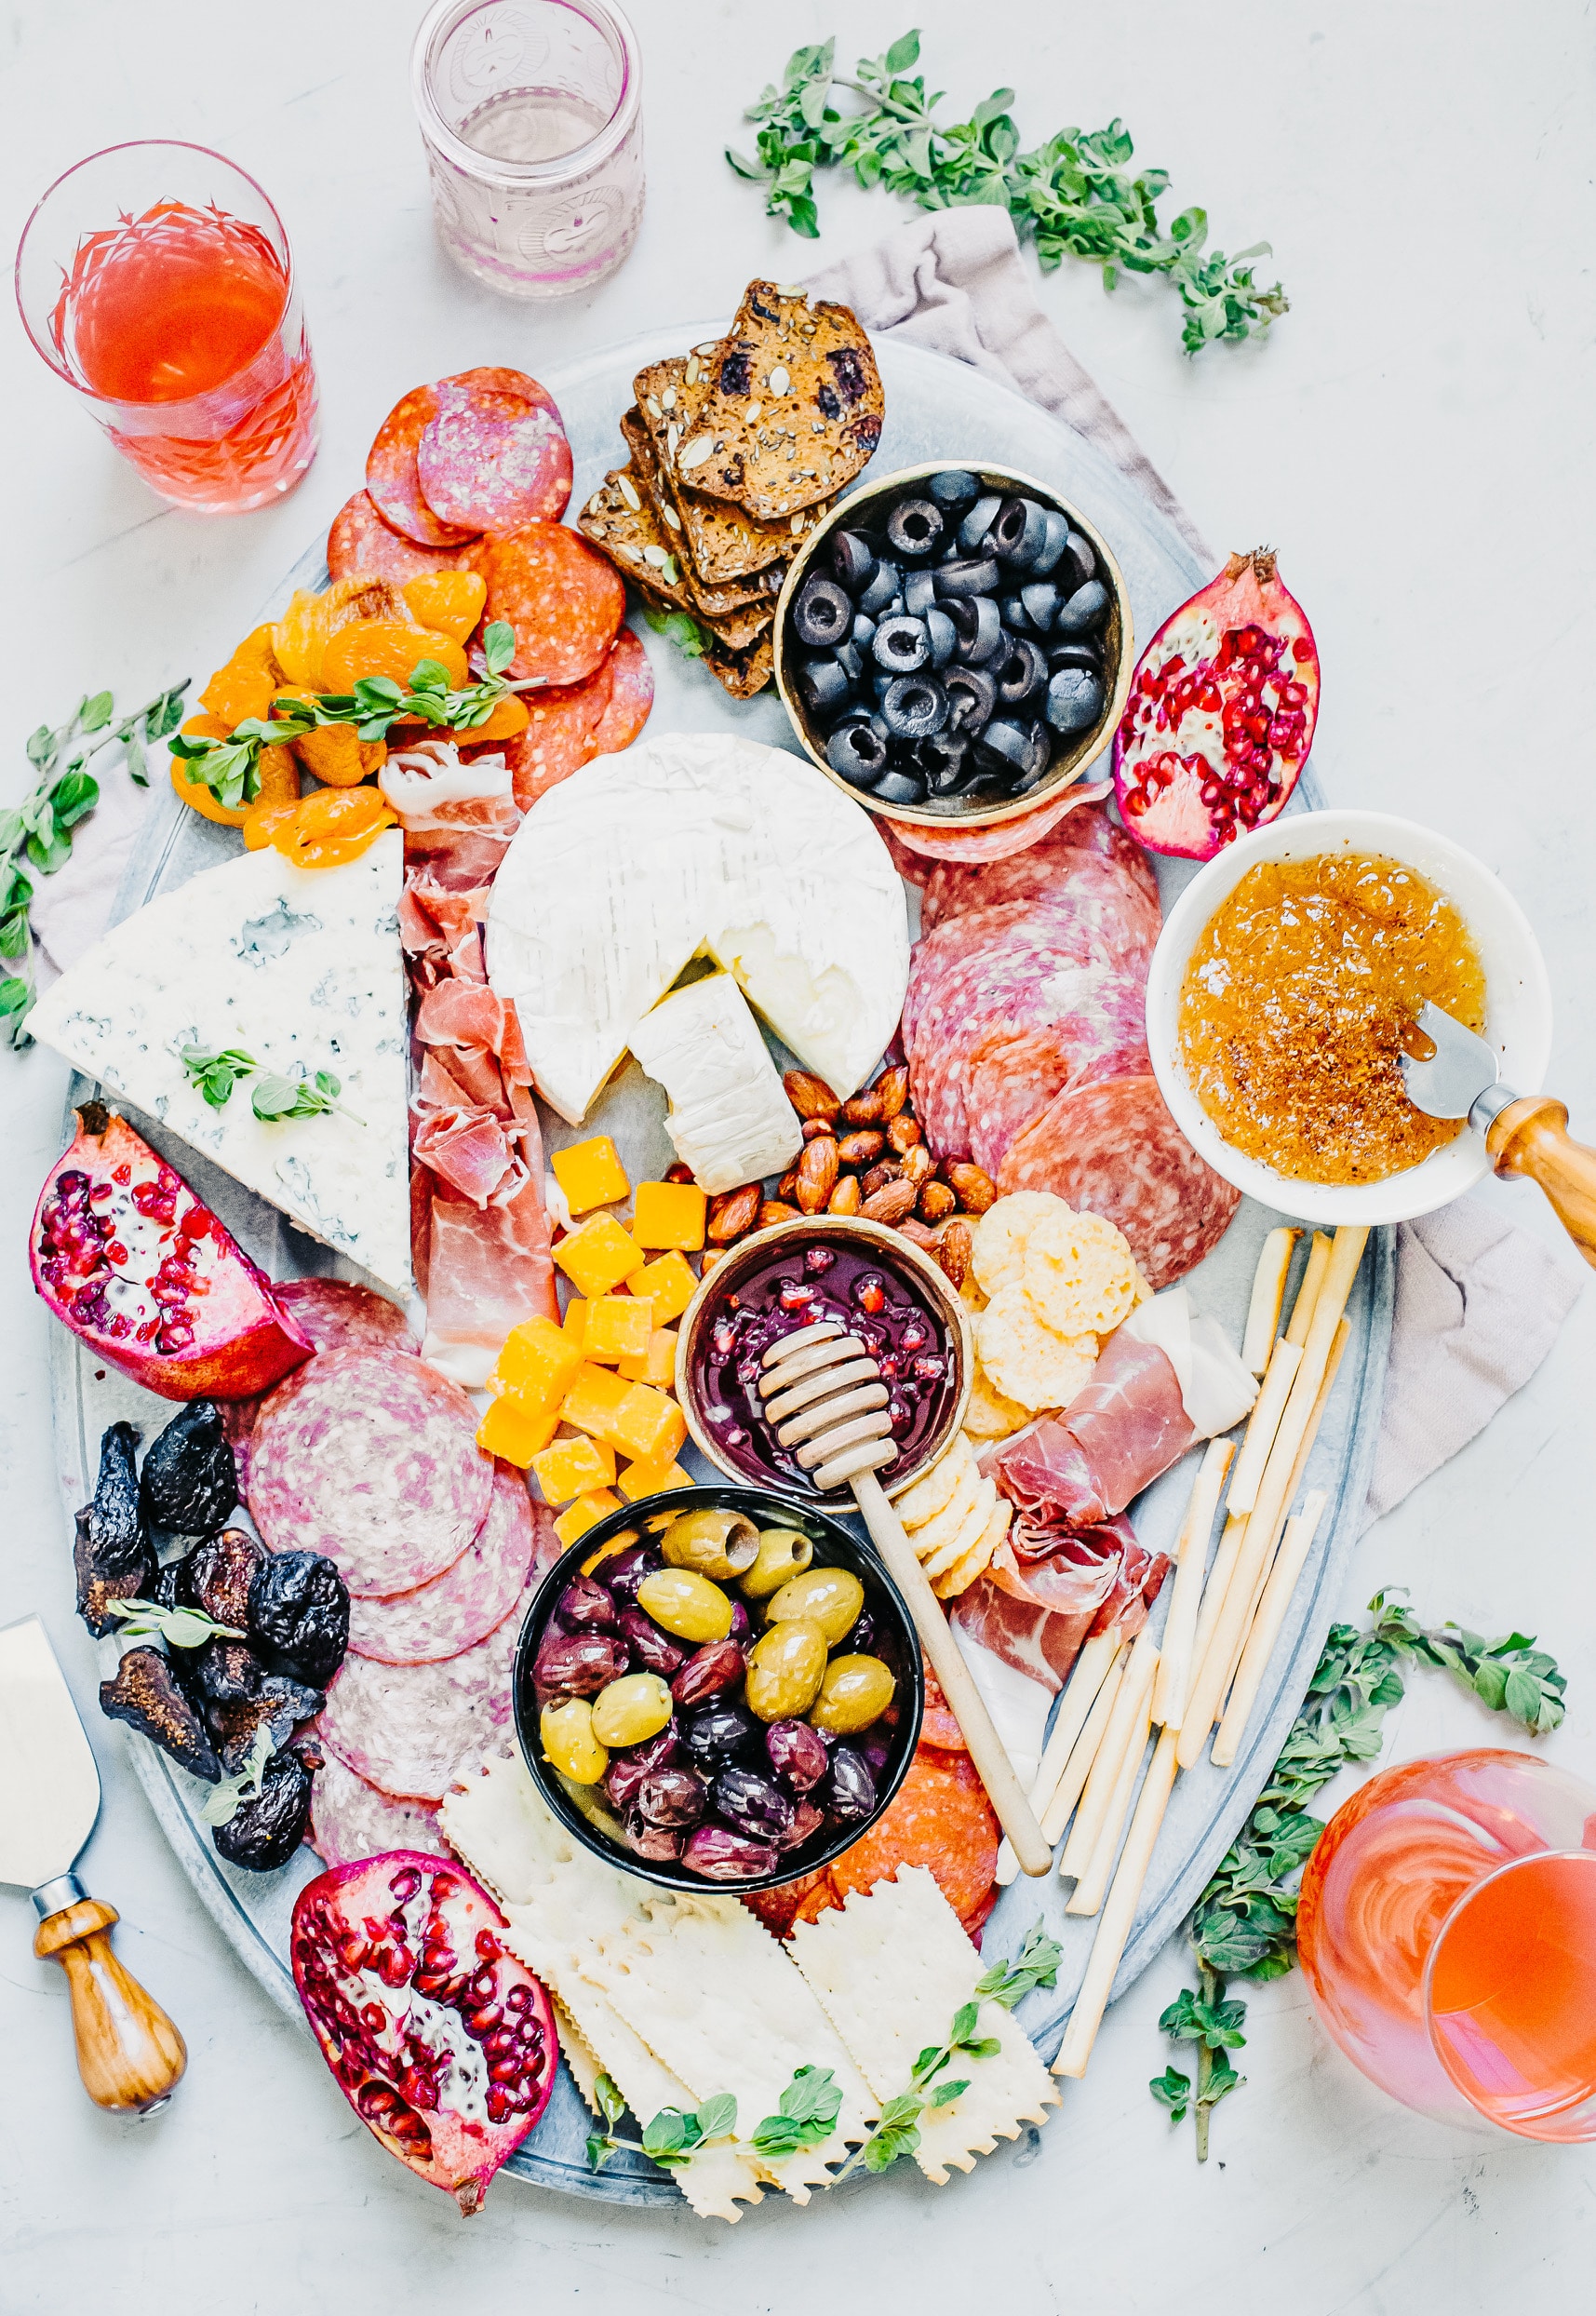 How to Make a Holiday Charcuterie Board